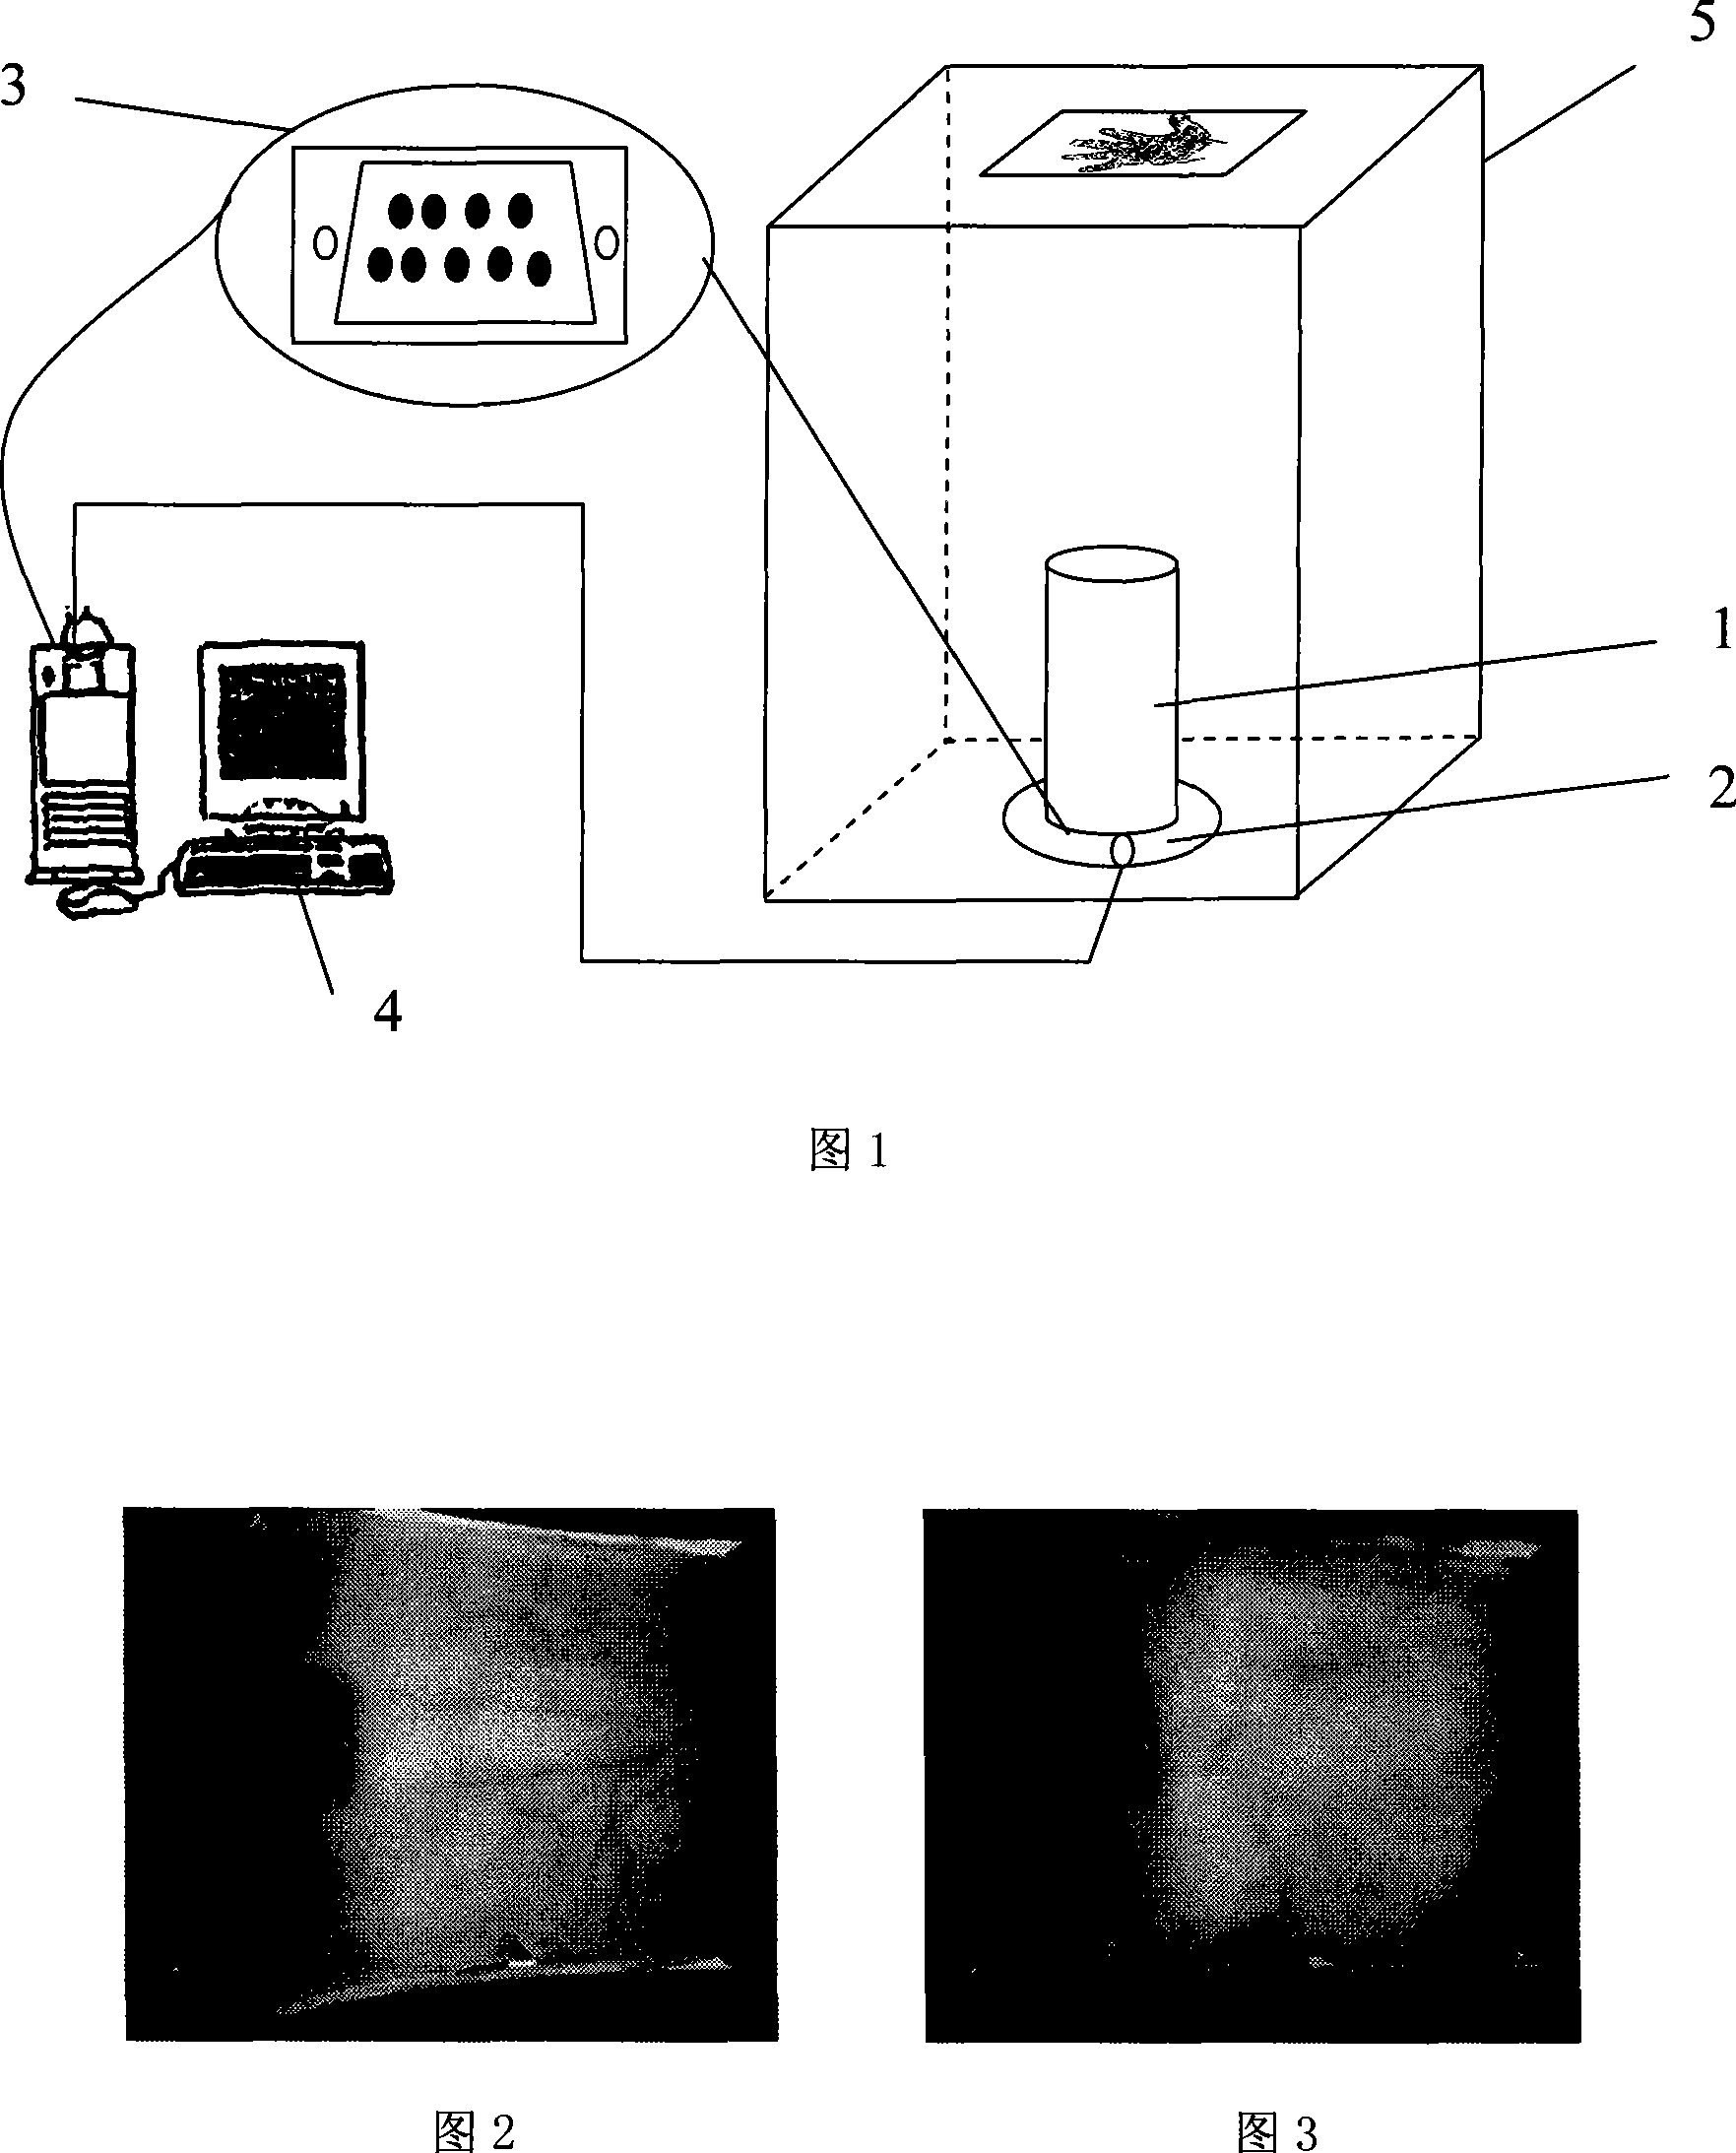 Personal identification method and near-infrared image forming apparatus based on palm vena and palm print